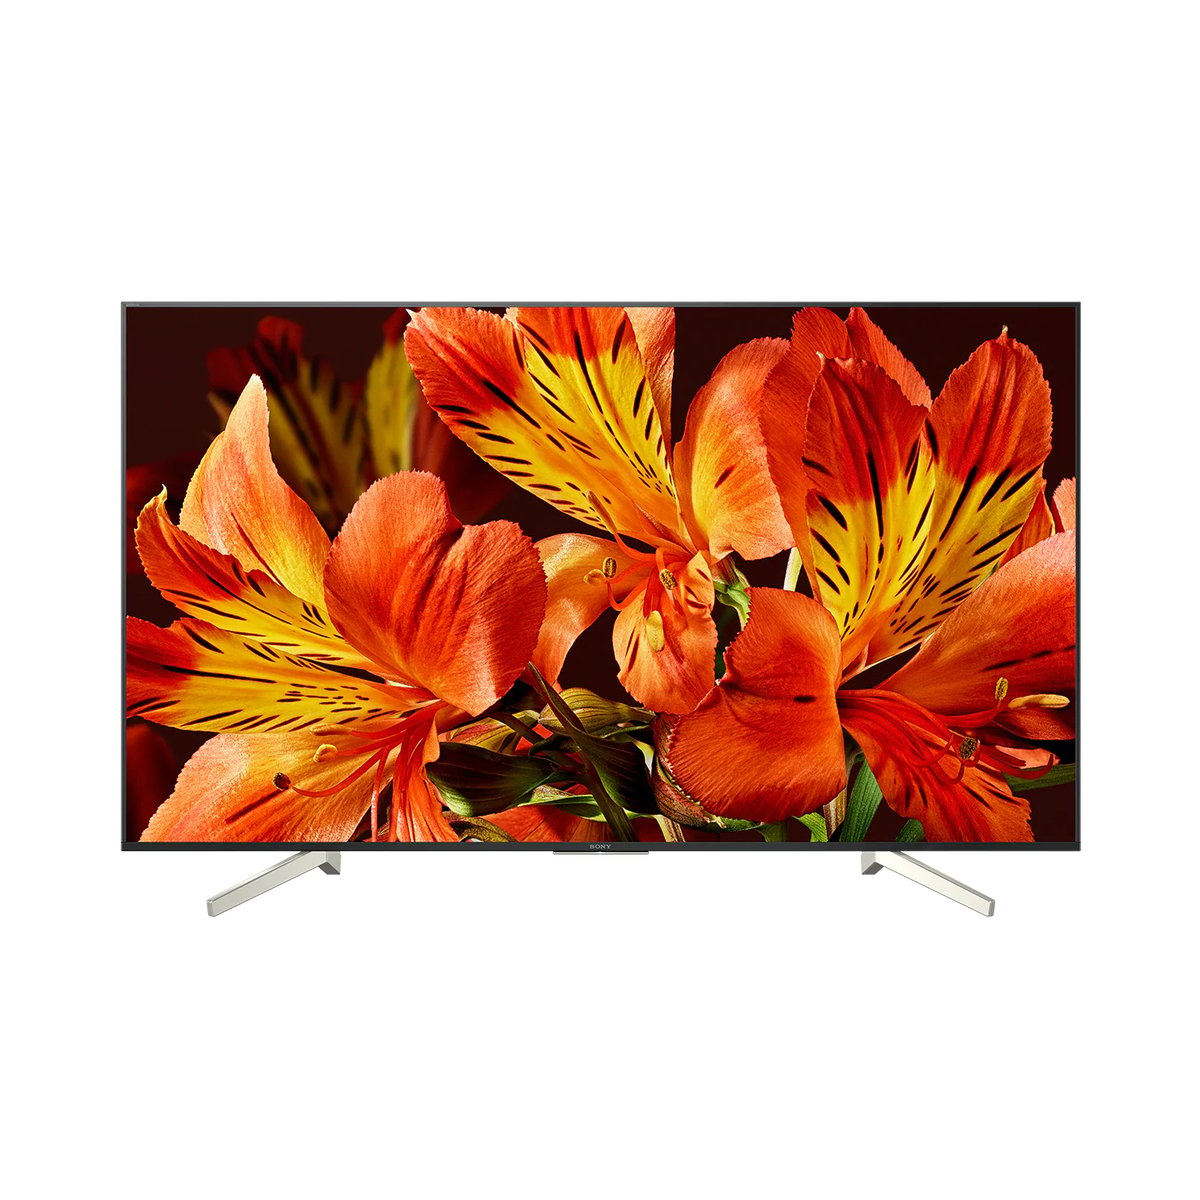 Sony 4K Ultra HD Android Smart LED TV KD-65X8500F 65inch